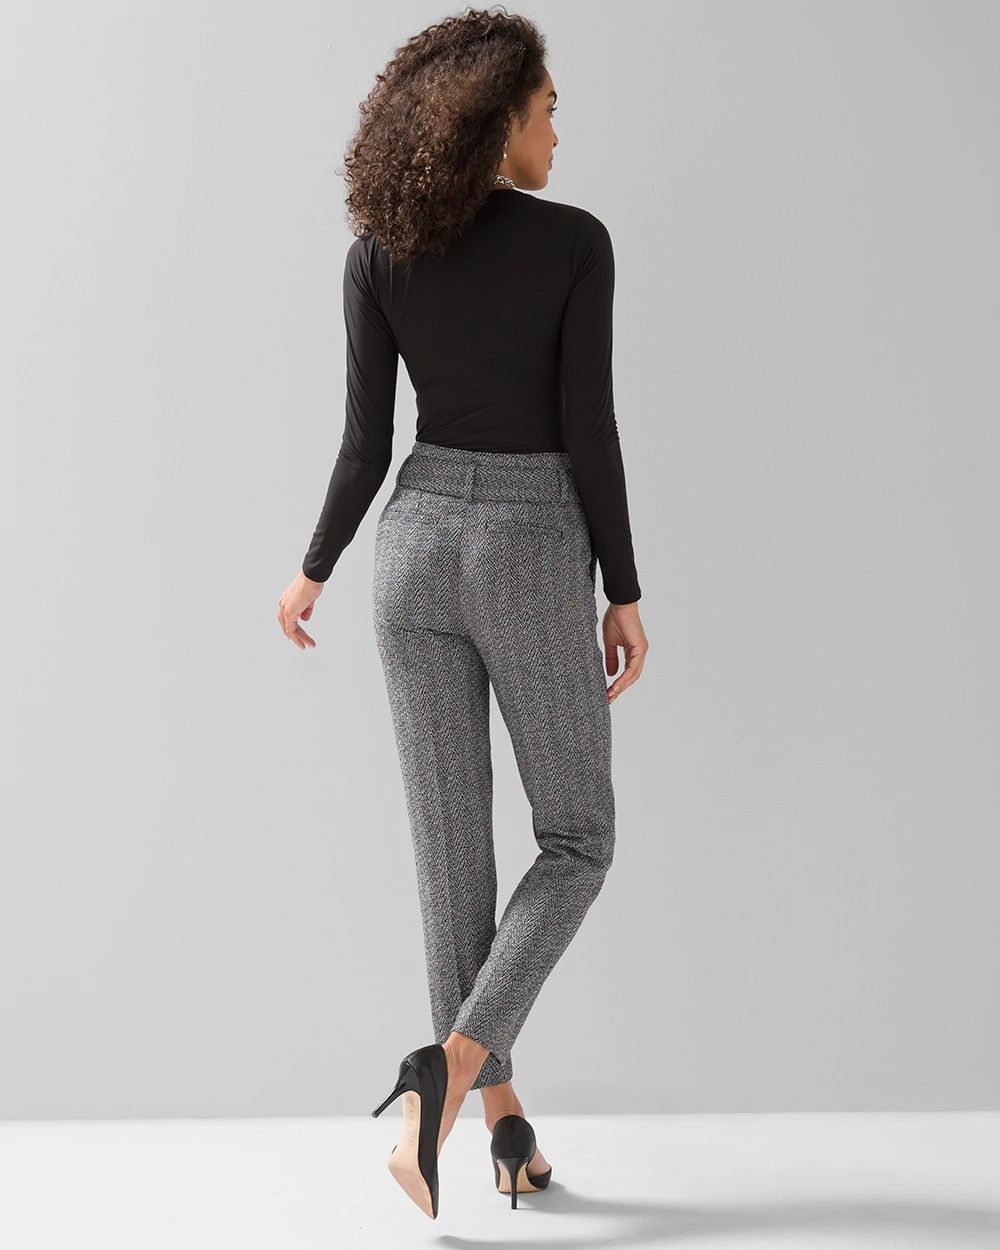 Herringbone Belted Tapered Ankle Pant click to view larger image.